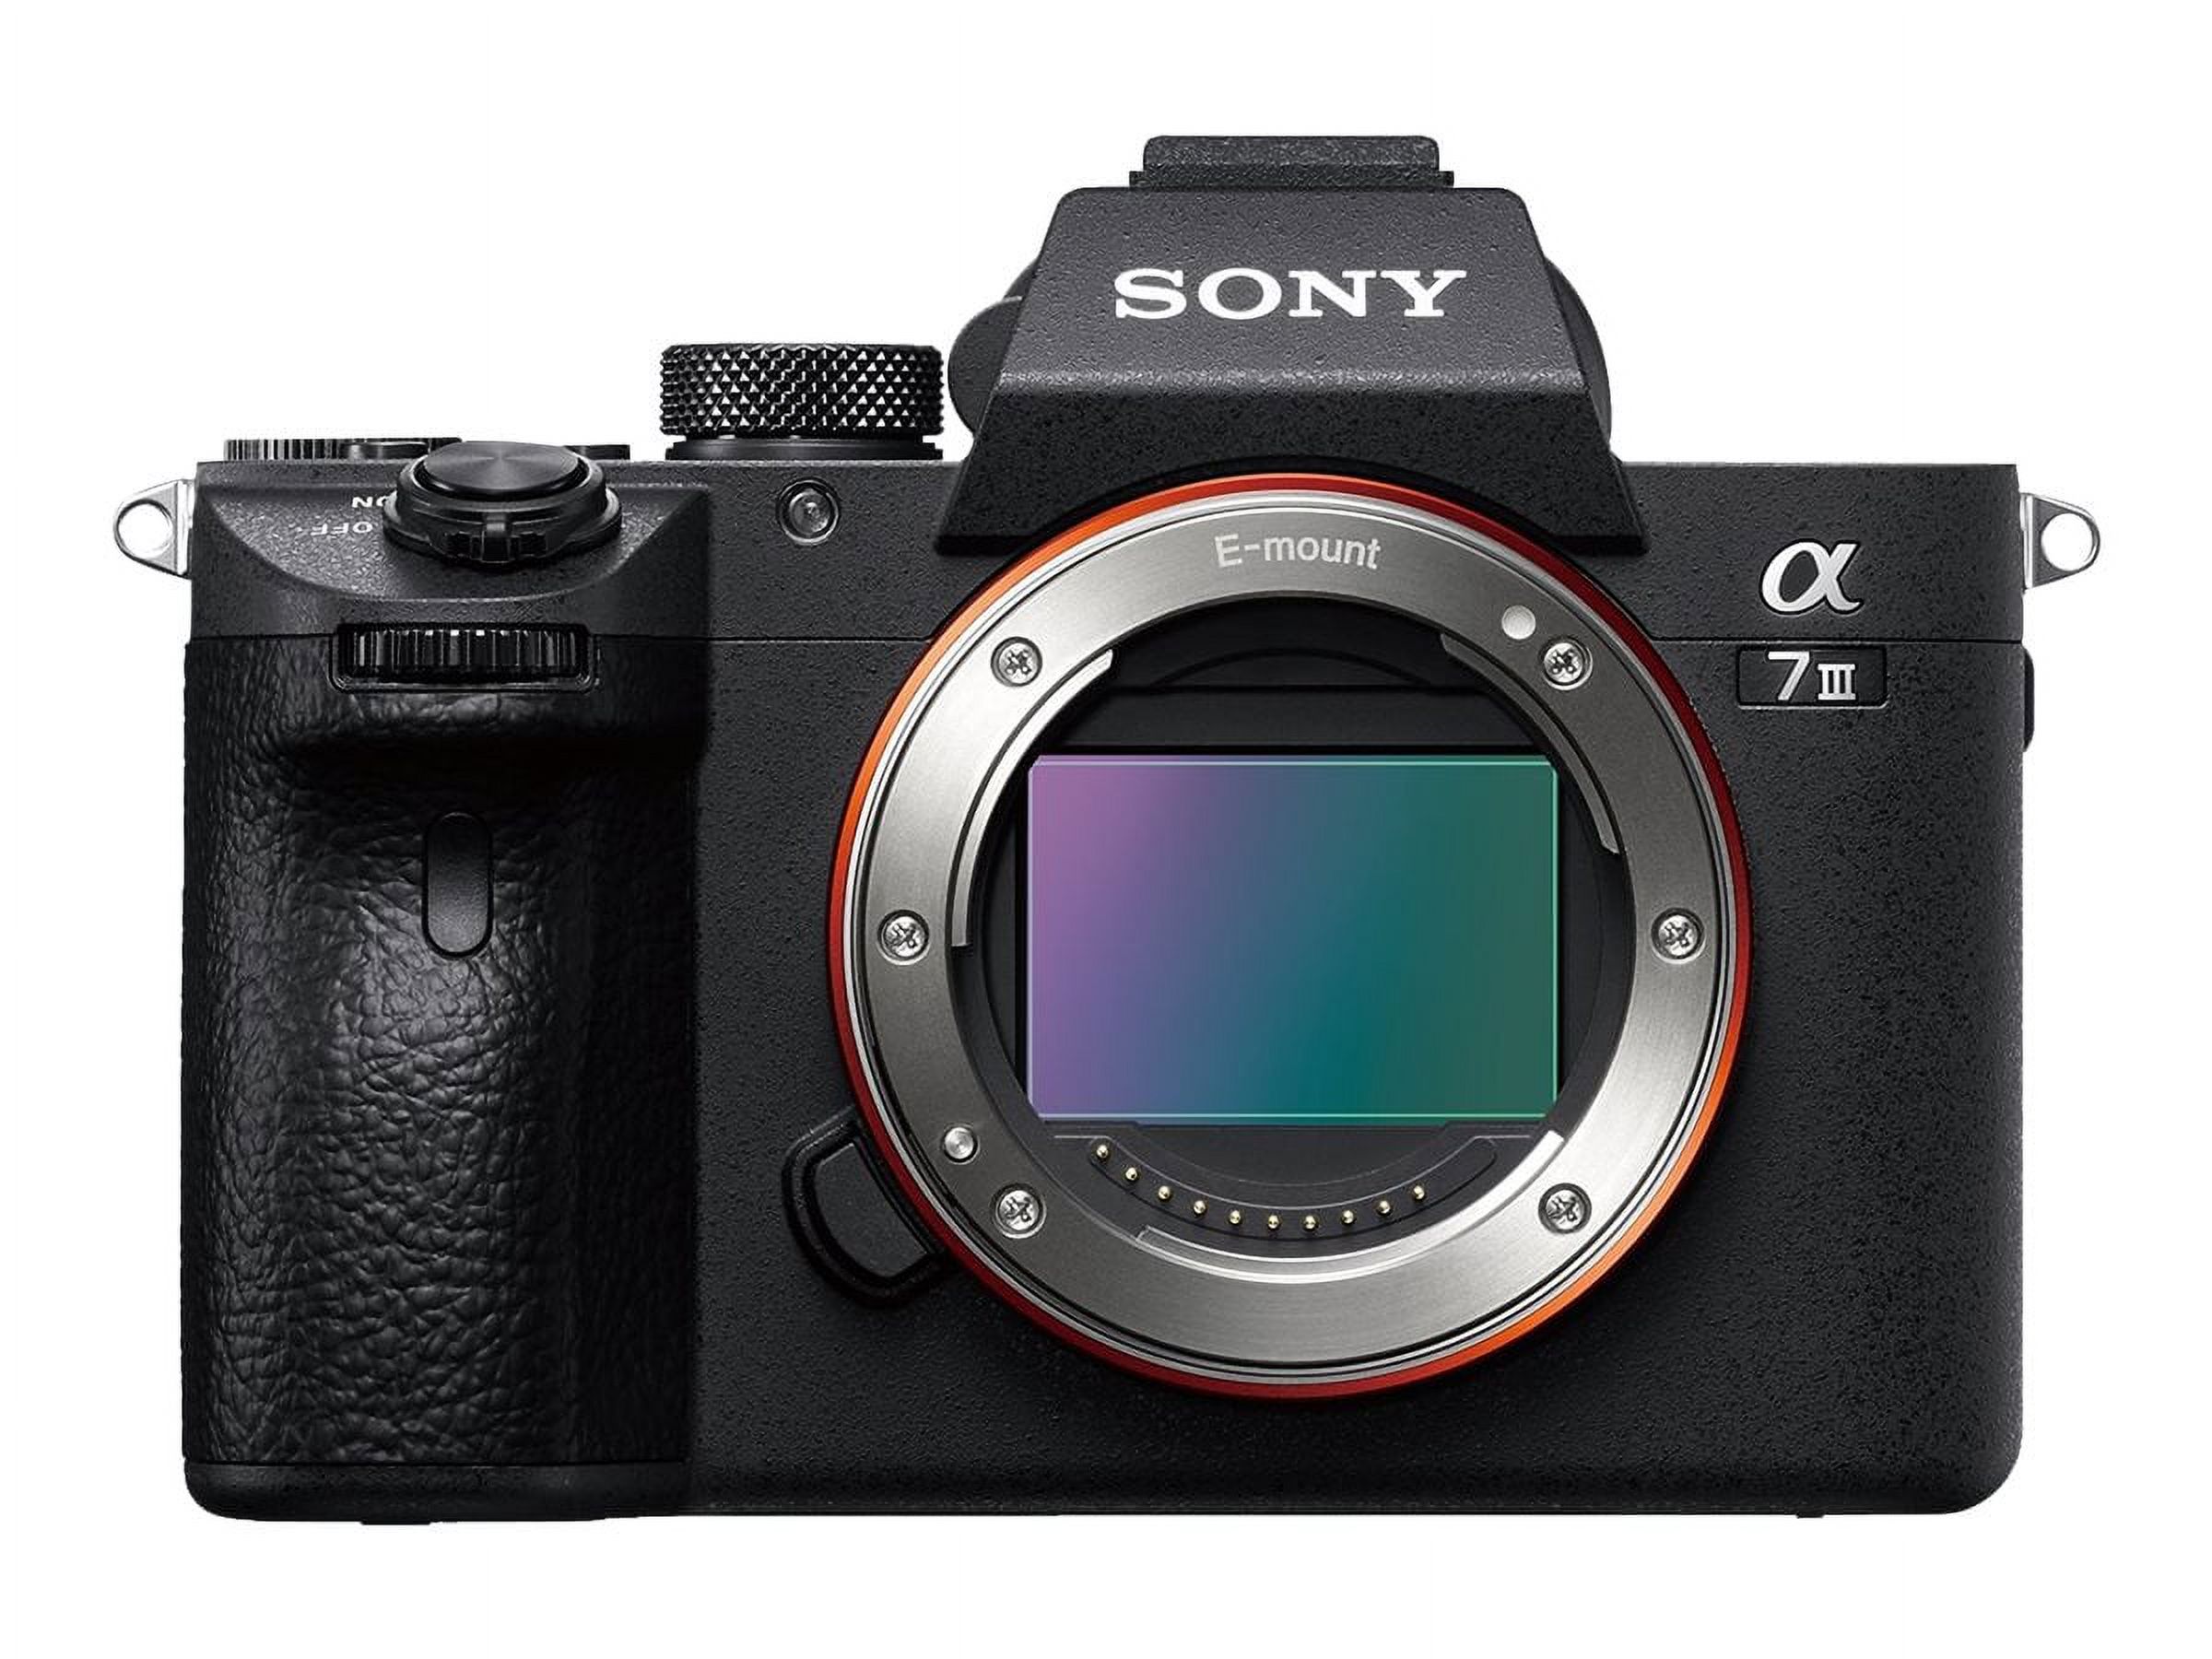 Sony a7 III ILCE-7M3 - Digital camera - mirrorless - 24.2 MP - Full Frame - 4K / 30 fps - body only - Wi-Fi, NFC, Bluetooth - image 1 of 6